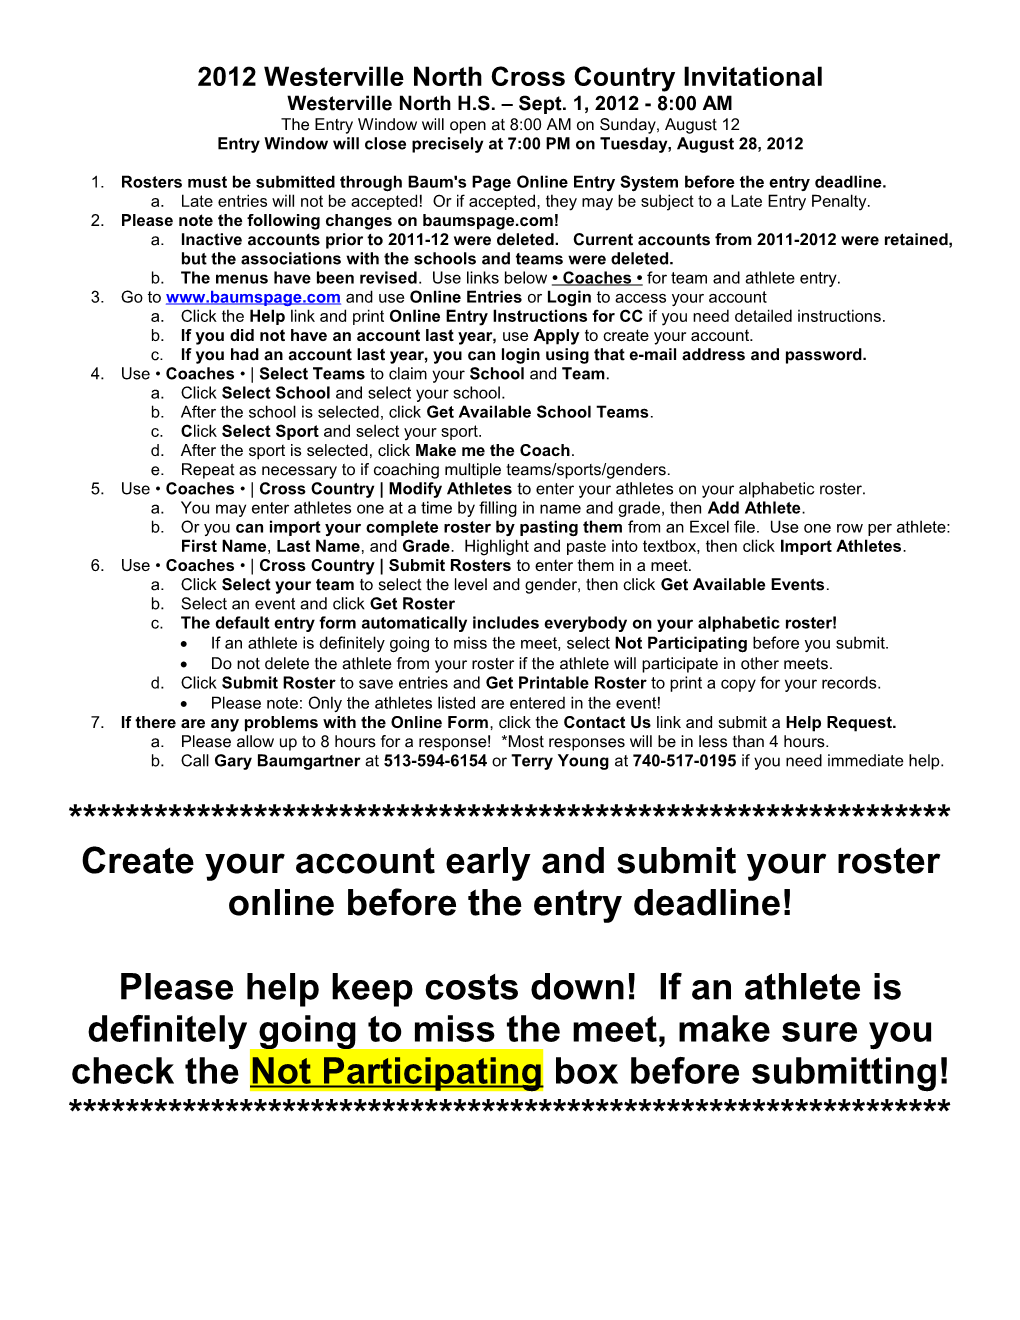 Online Entry Instructions